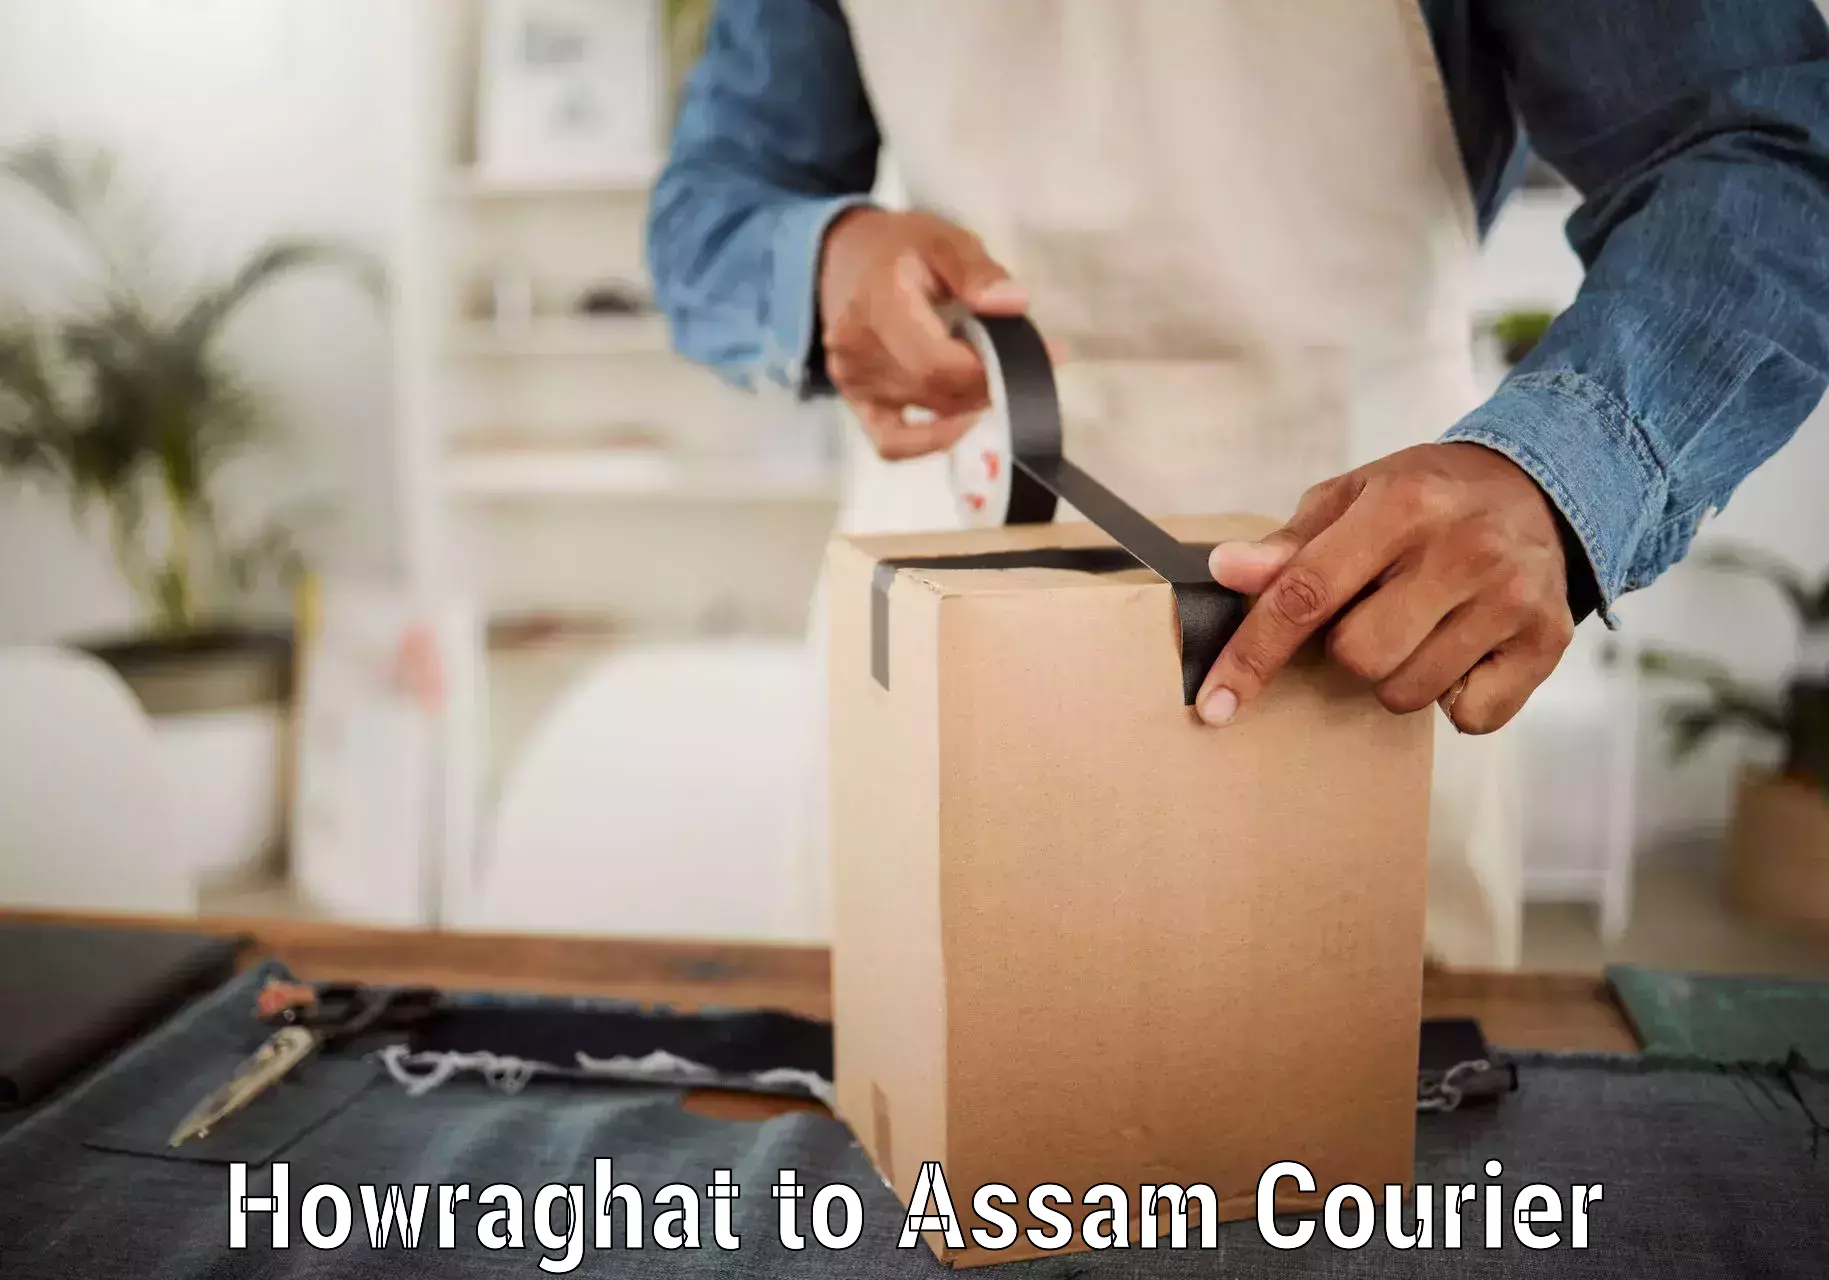 Easy access courier services Howraghat to Bijni